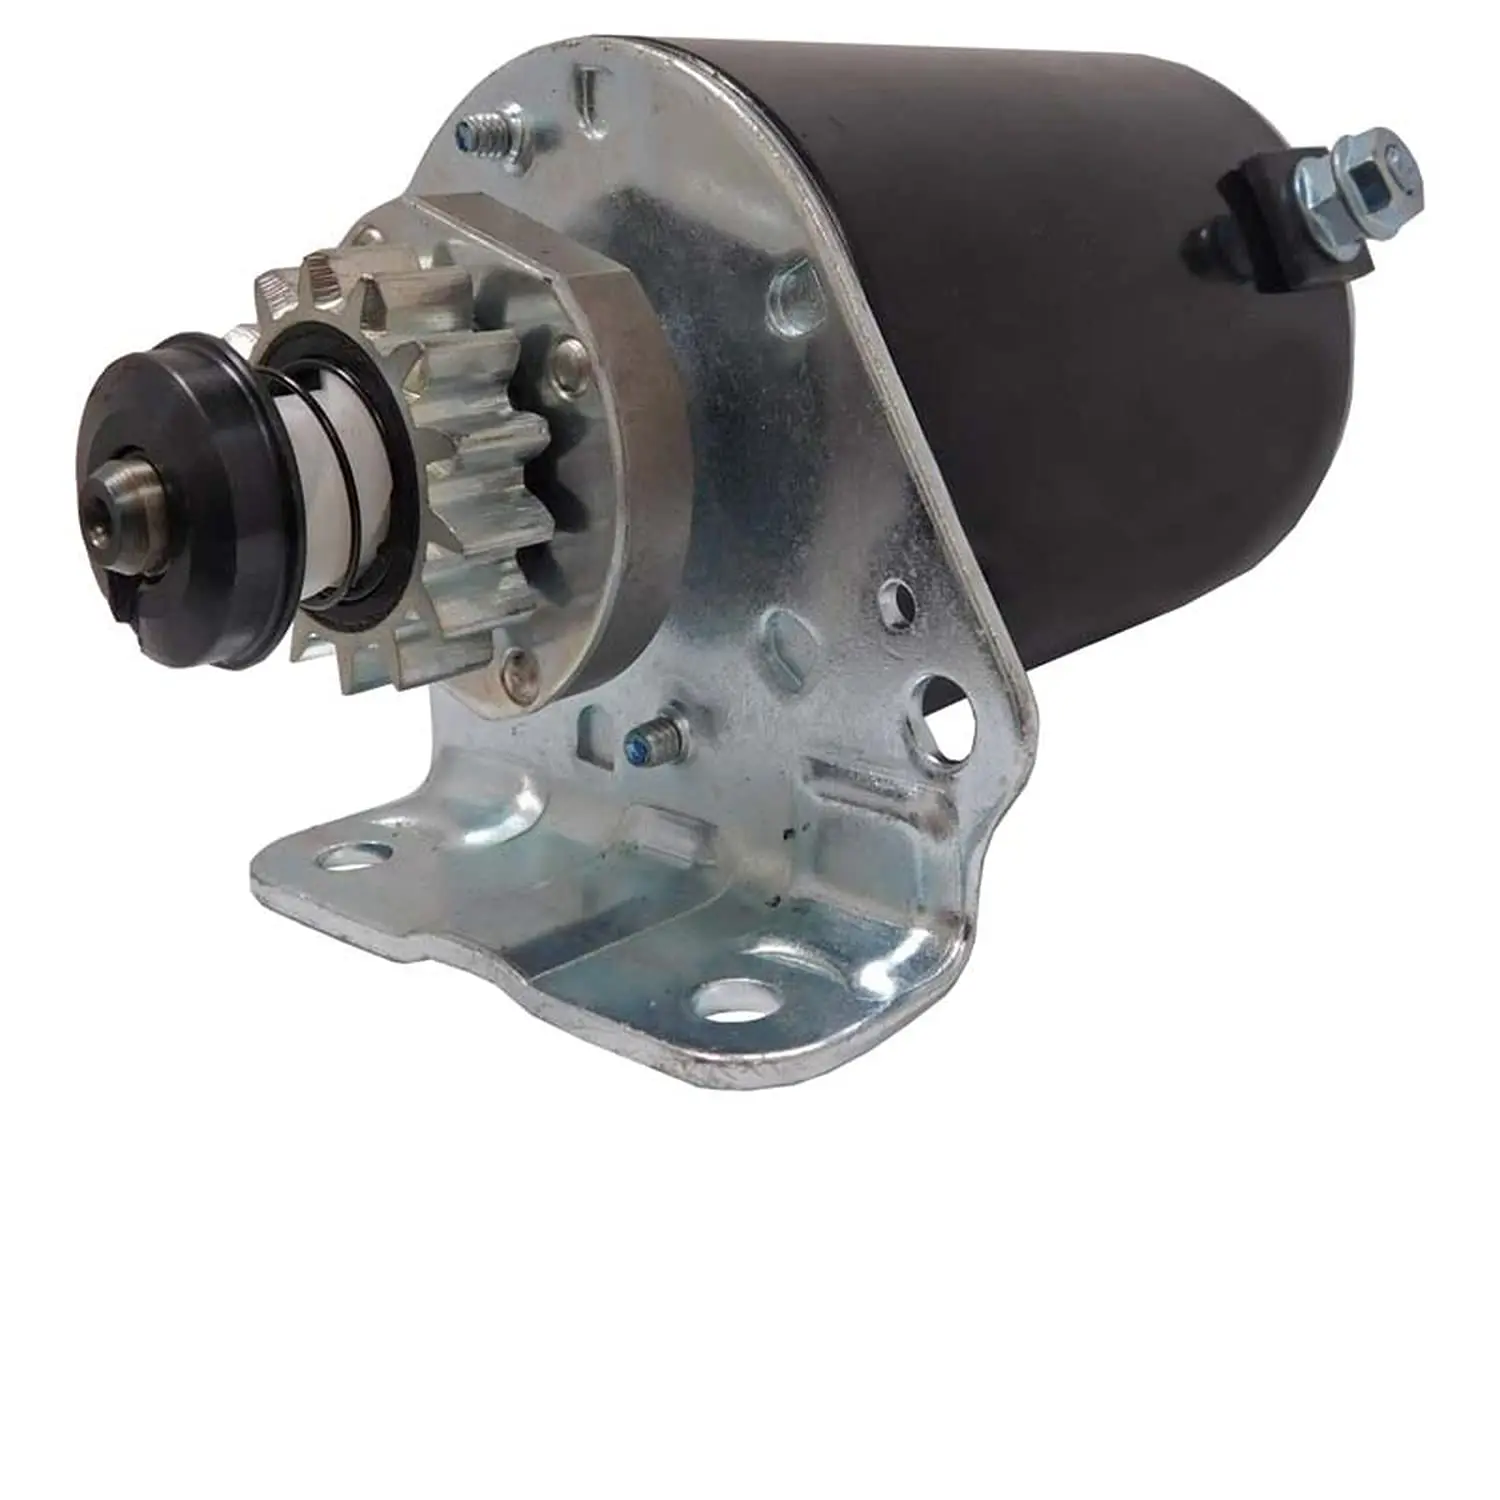 

Starter Fit For Briggs and Stratton Cub Cadet 14.5 16 16.5 17 17.5 18 18.5 HP For John Deere New Holland Toro 14 Tooth Gear 5939